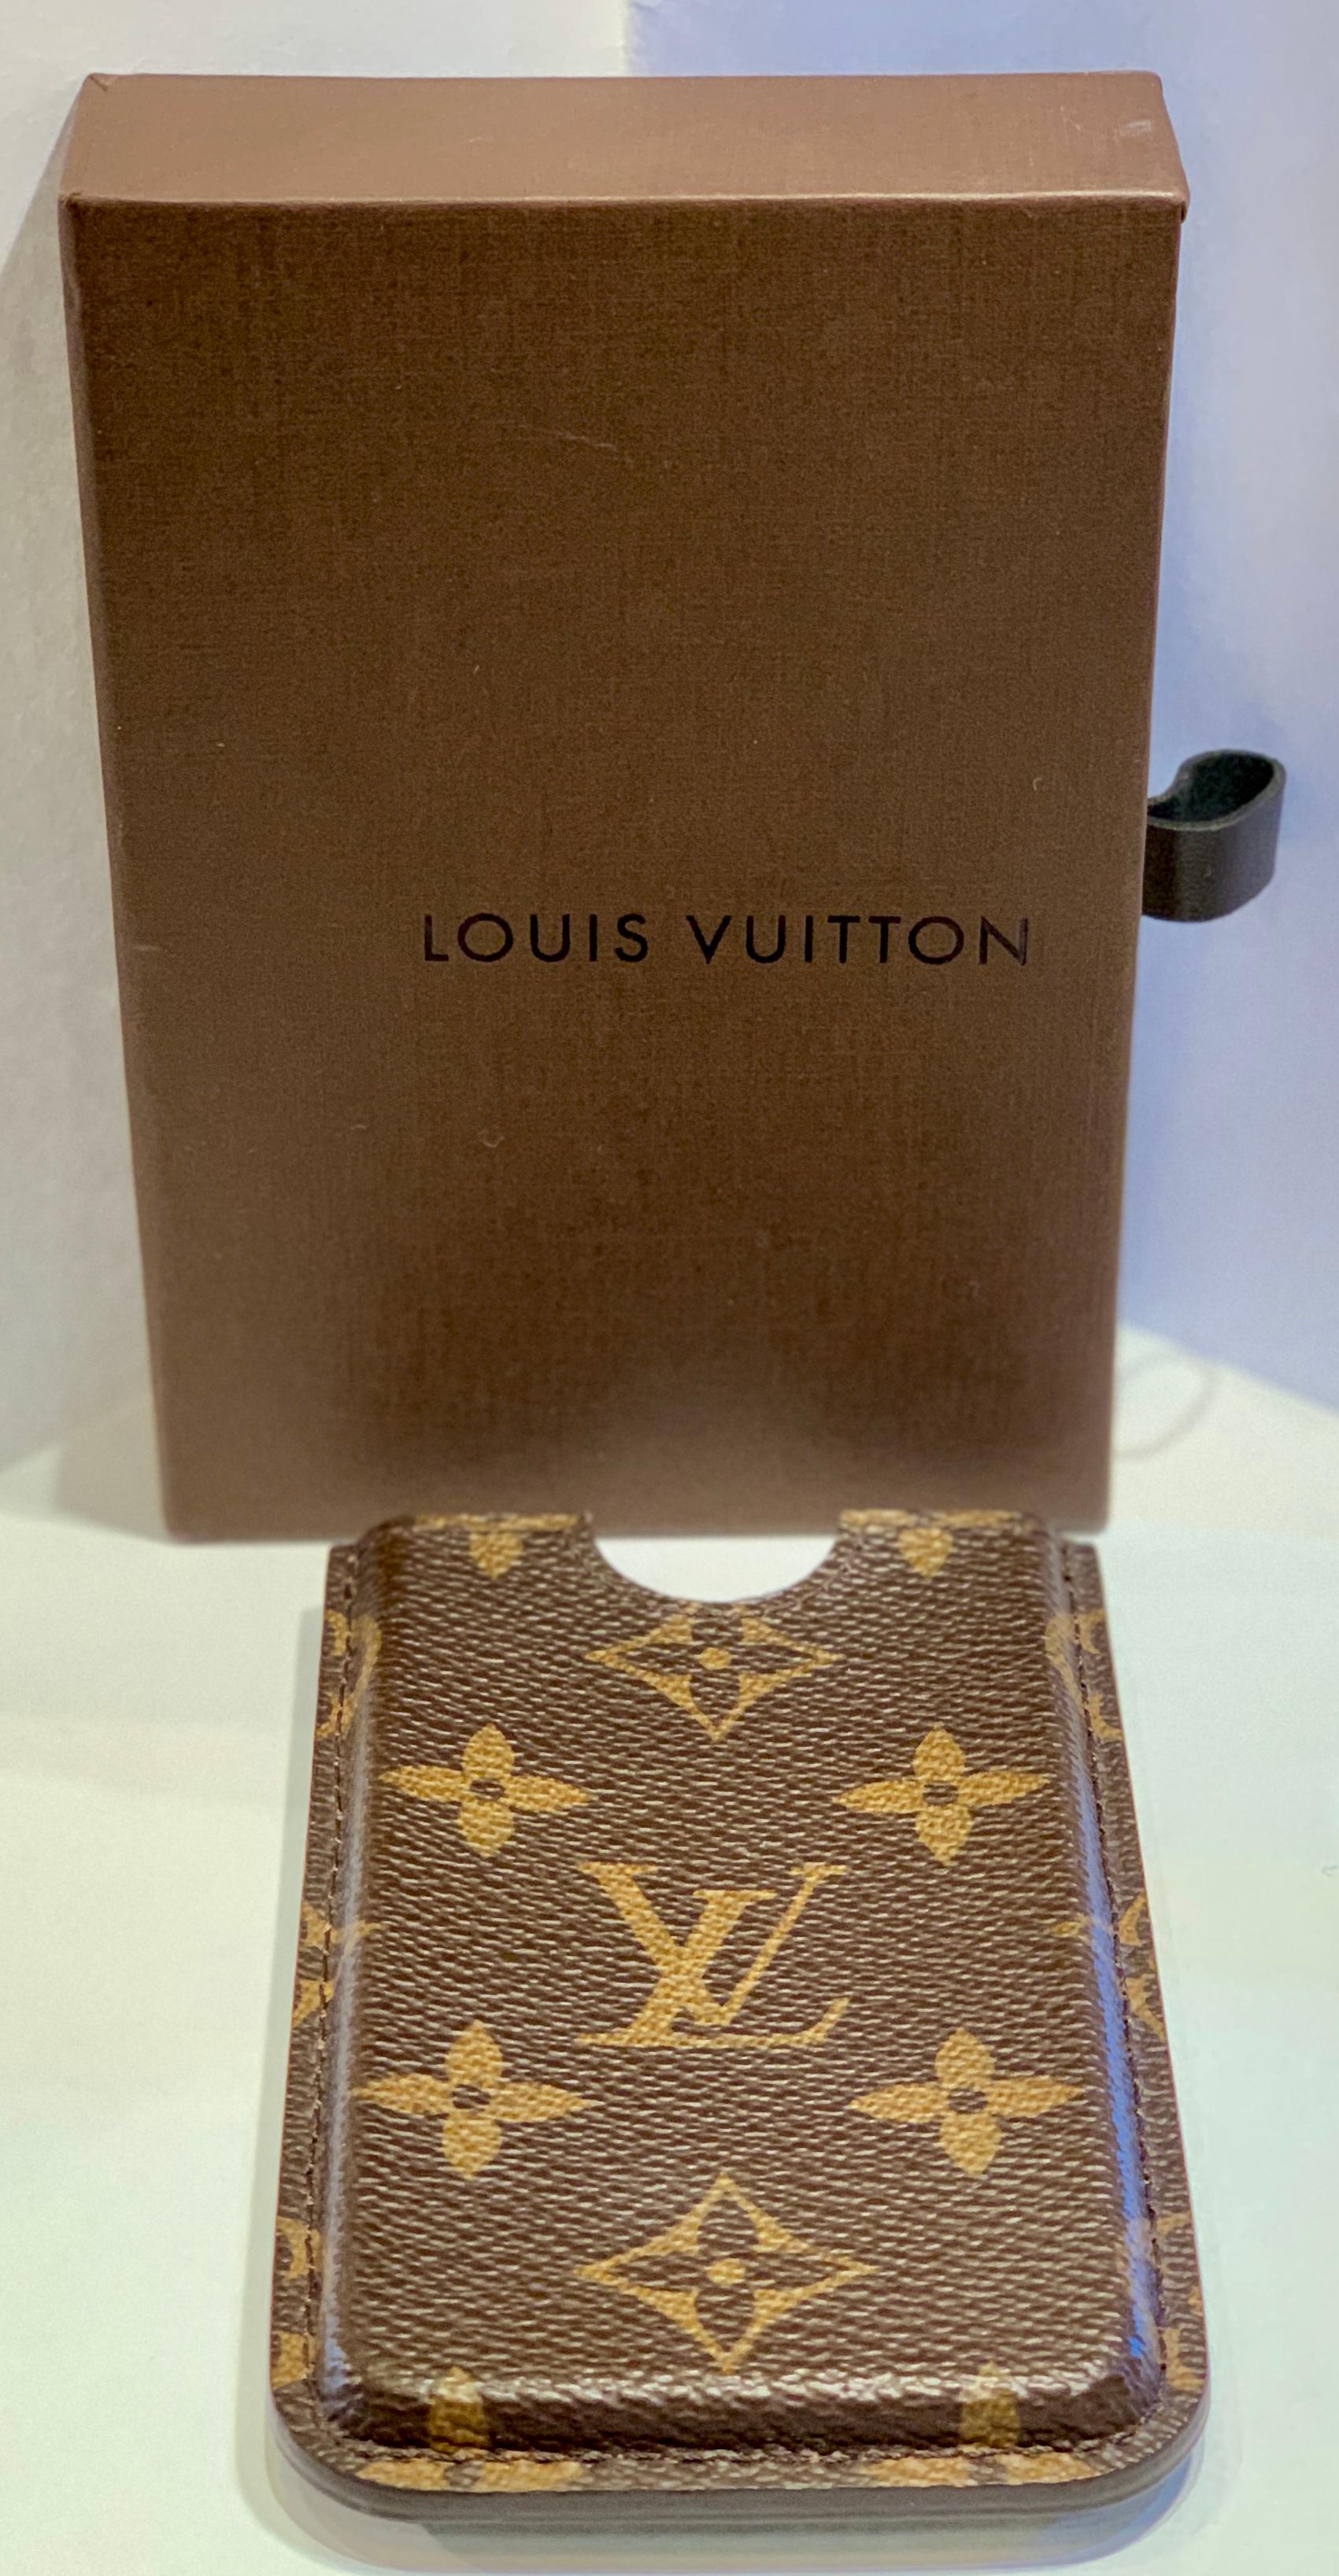 Classic Louis Vuitton Iconic Monogram Cell Phone Case or Holder In Good Condition For Sale In Tustin, CA